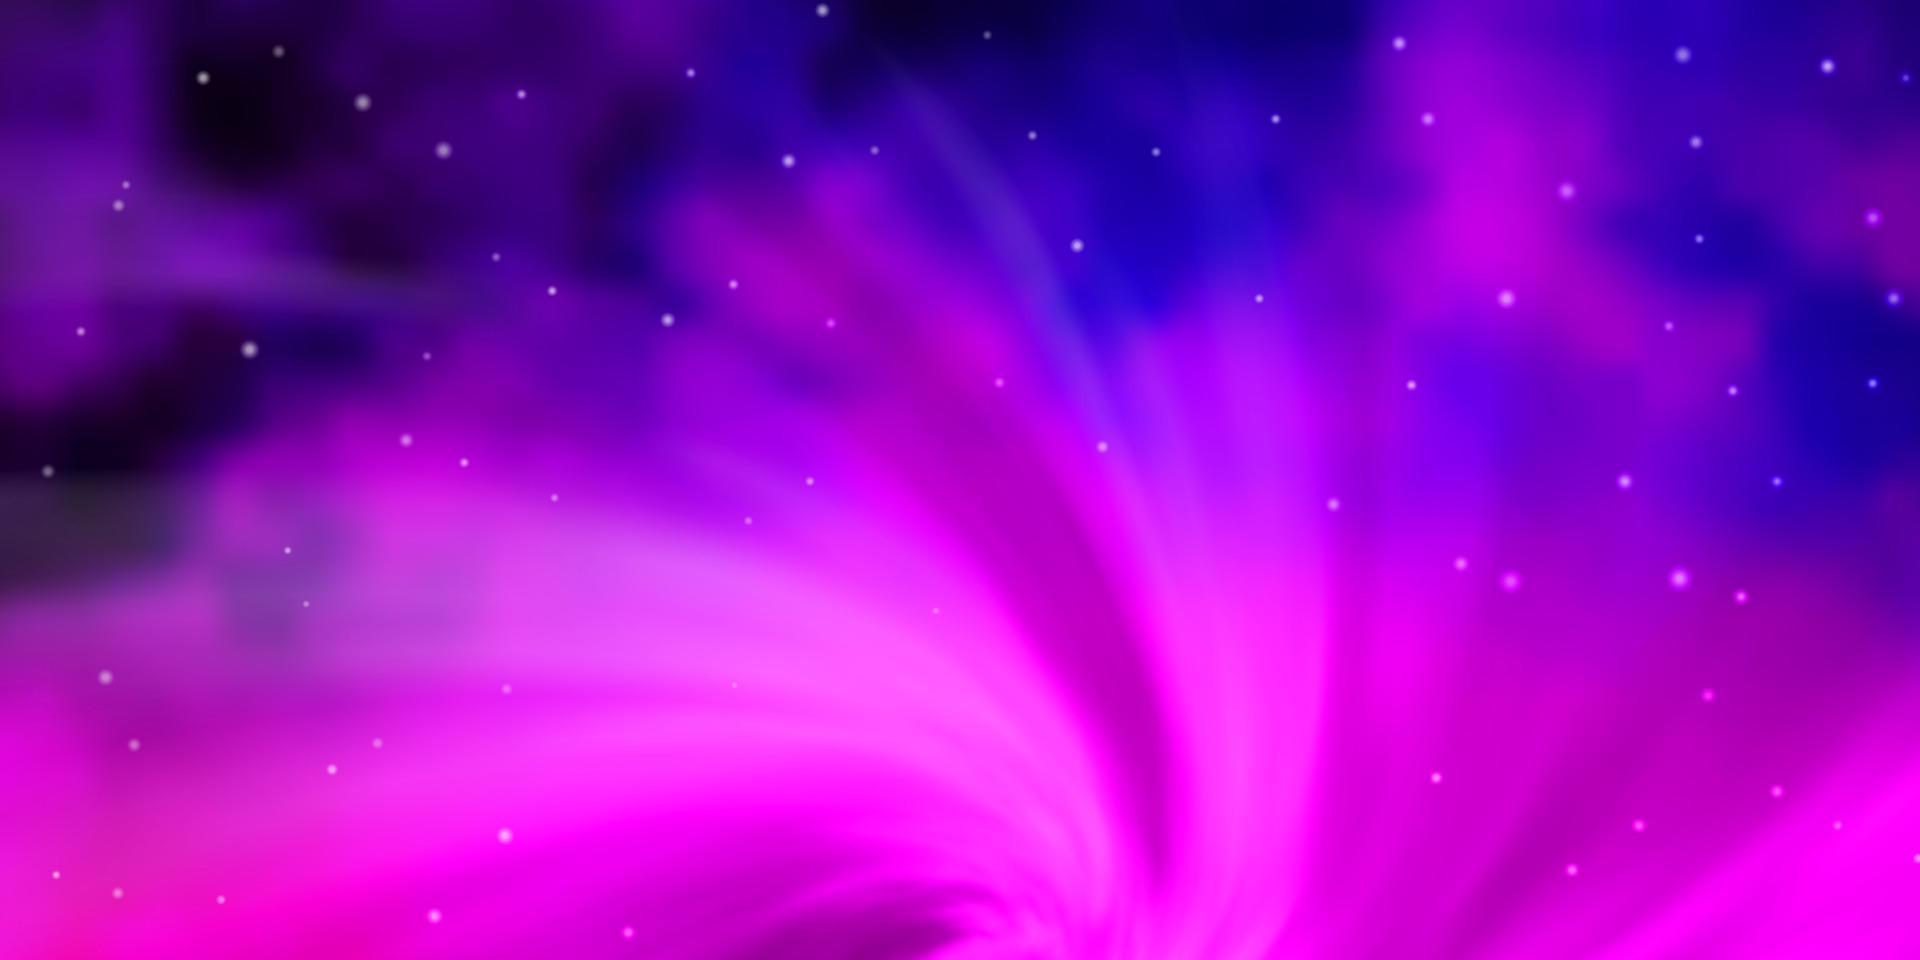 Light Purple, Pink vector background with colorful stars.